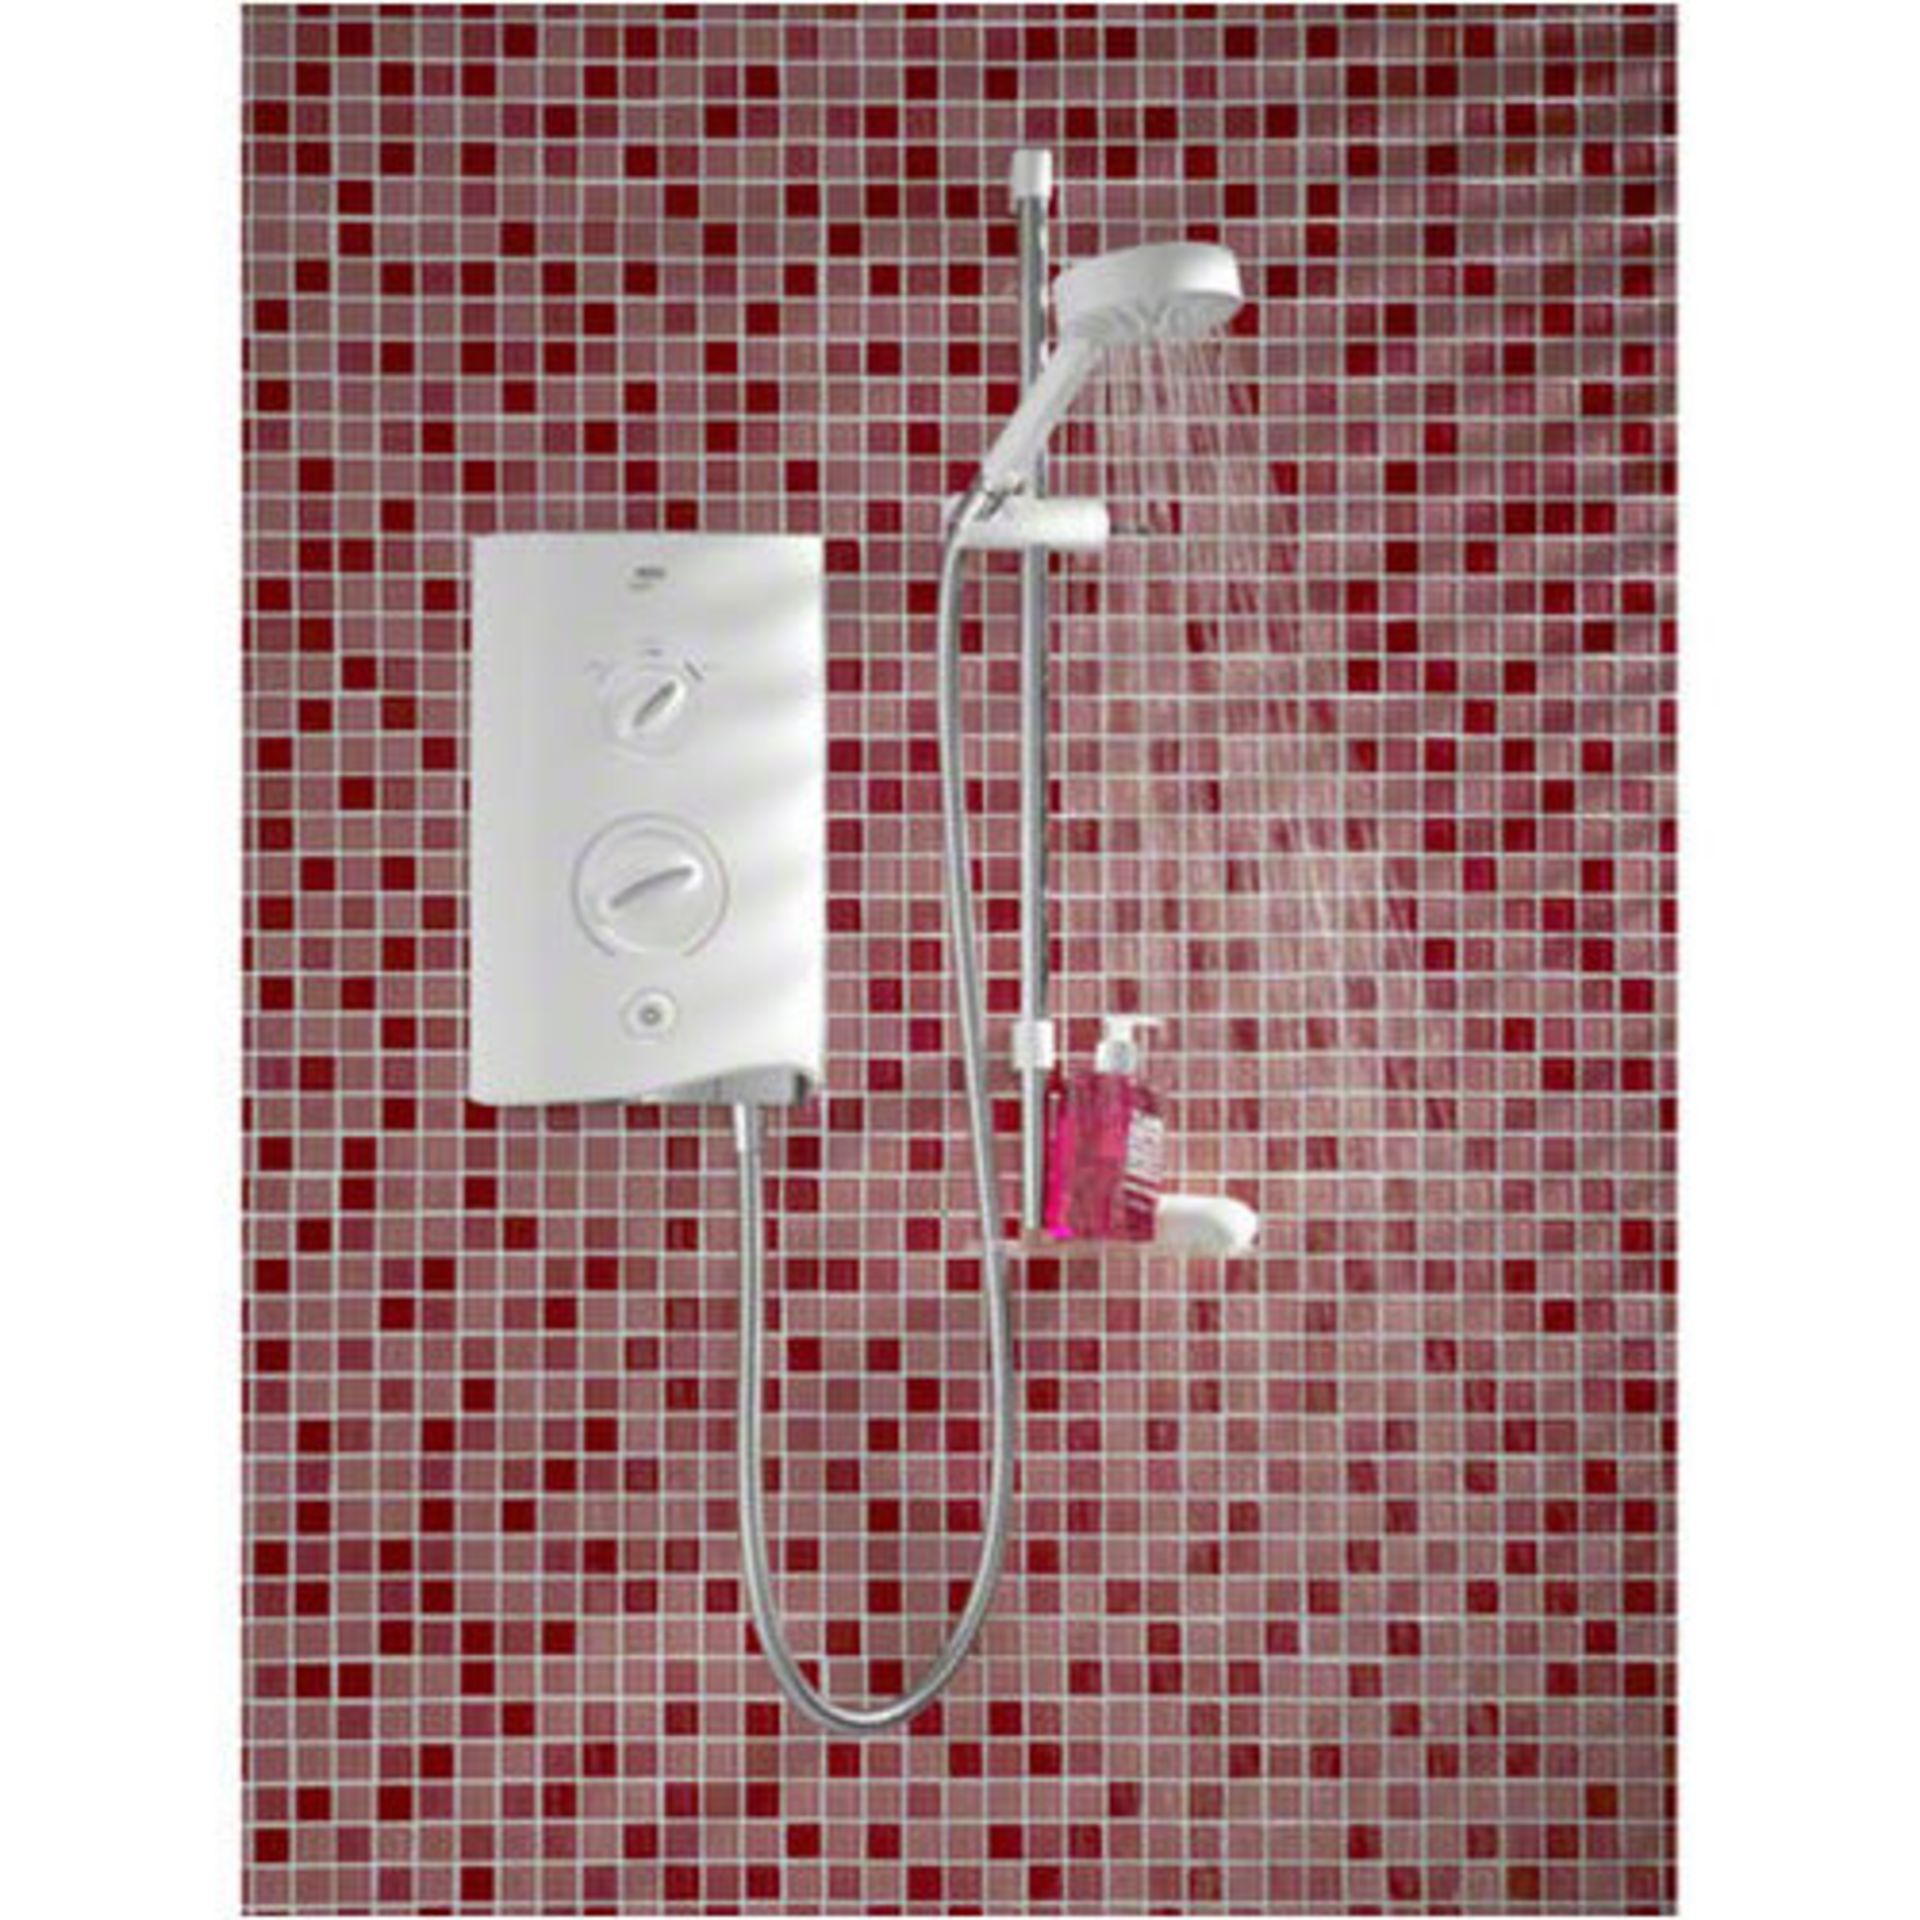 1 x Mira Sport Thermostatic White and Chrome 9.0kW Electric Shower - New Boxed Stock - RRP: £320